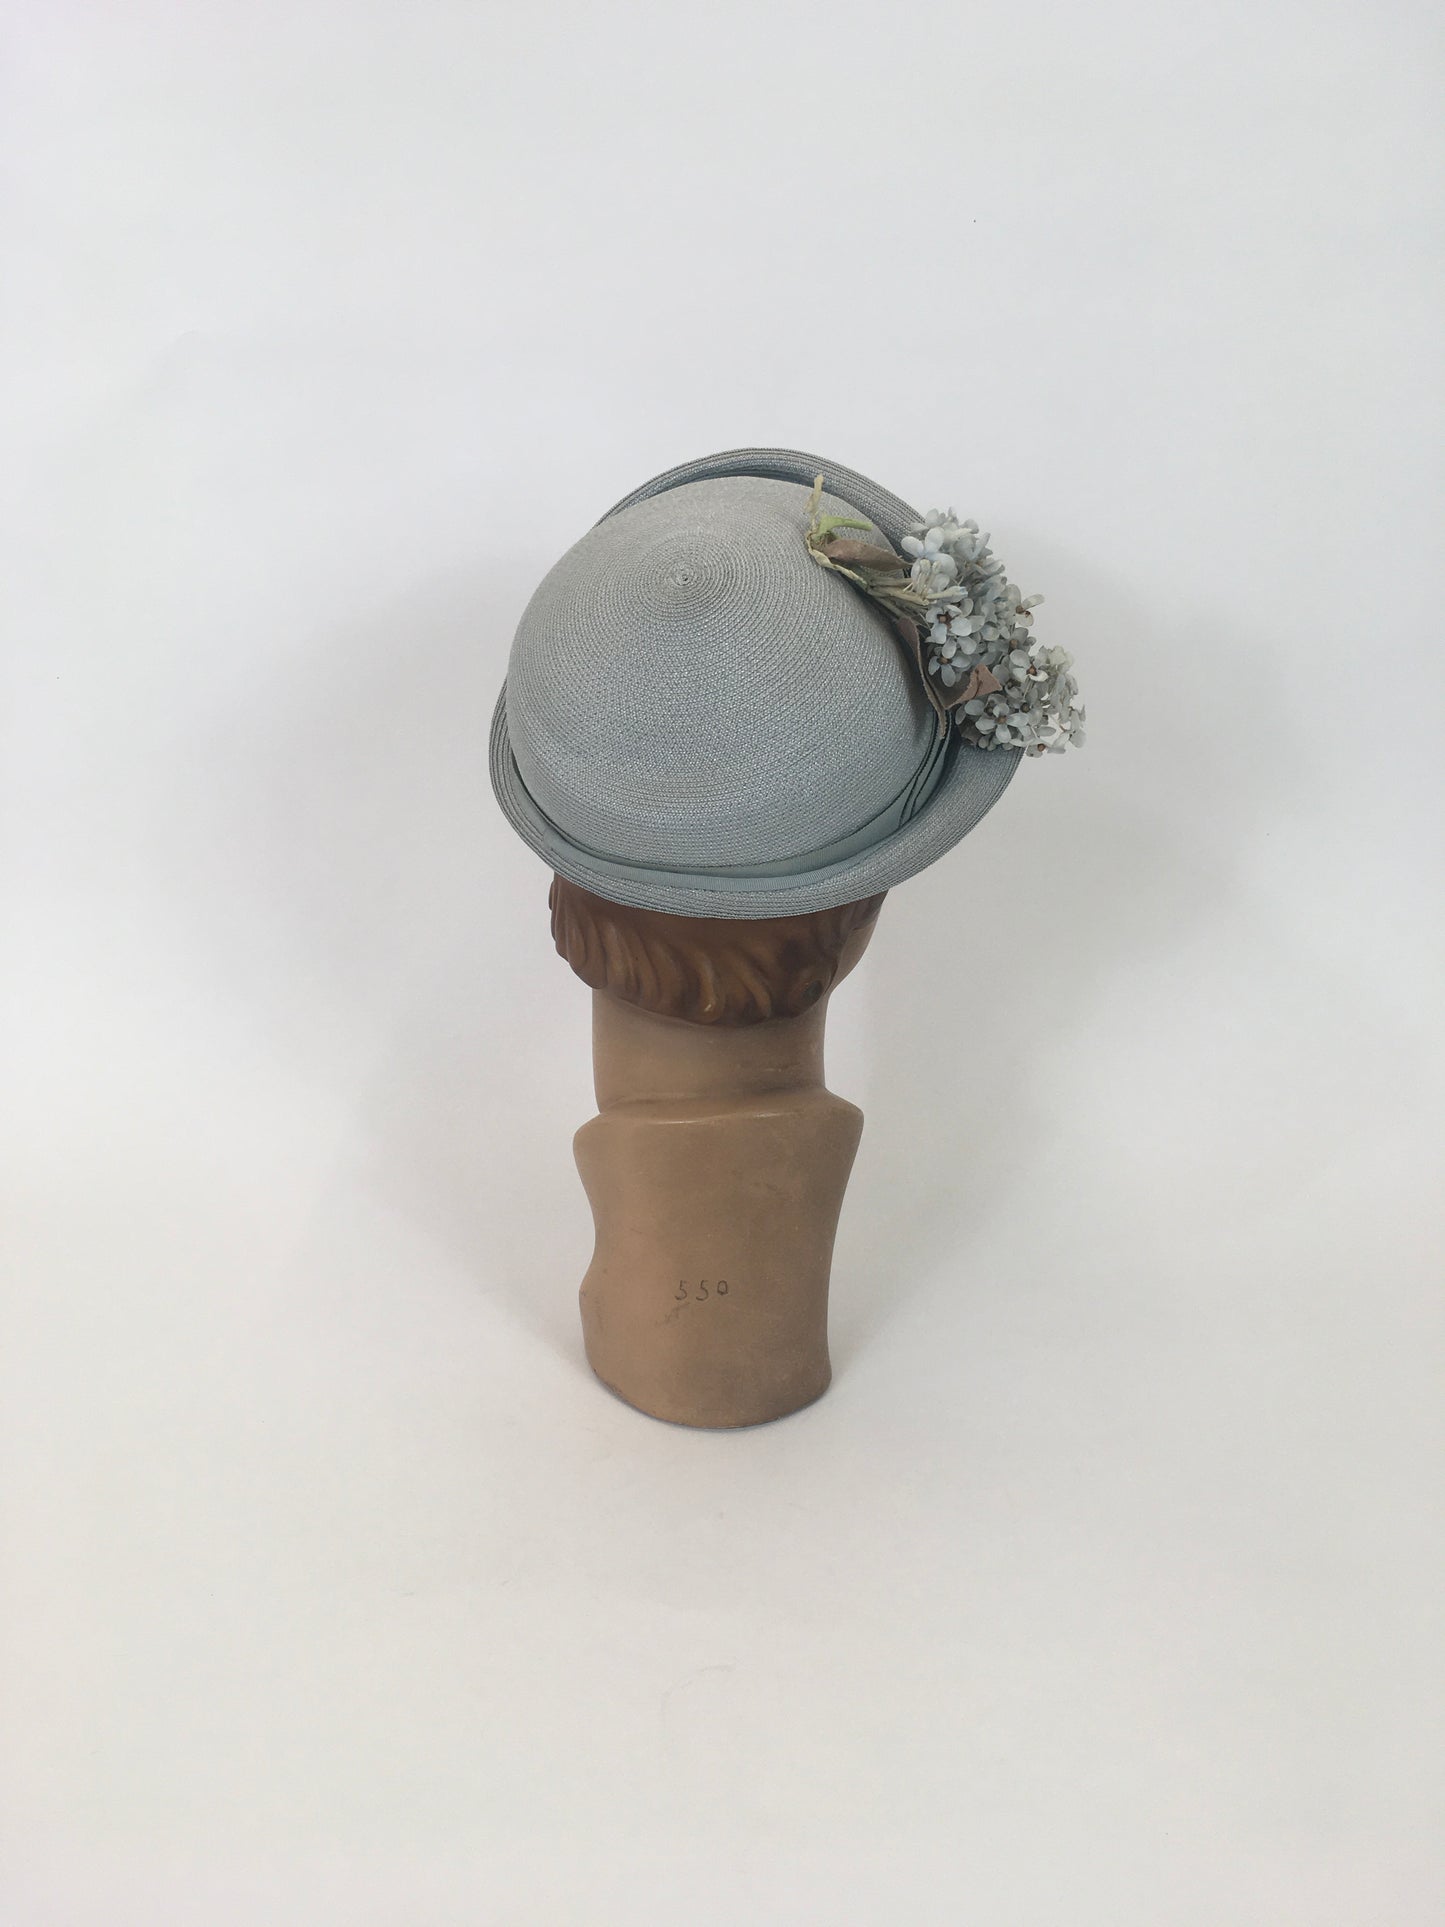 Original 1930’s Gorgeous  Fine Natural Straw Hat - In Pale Blue with Floral Millinery